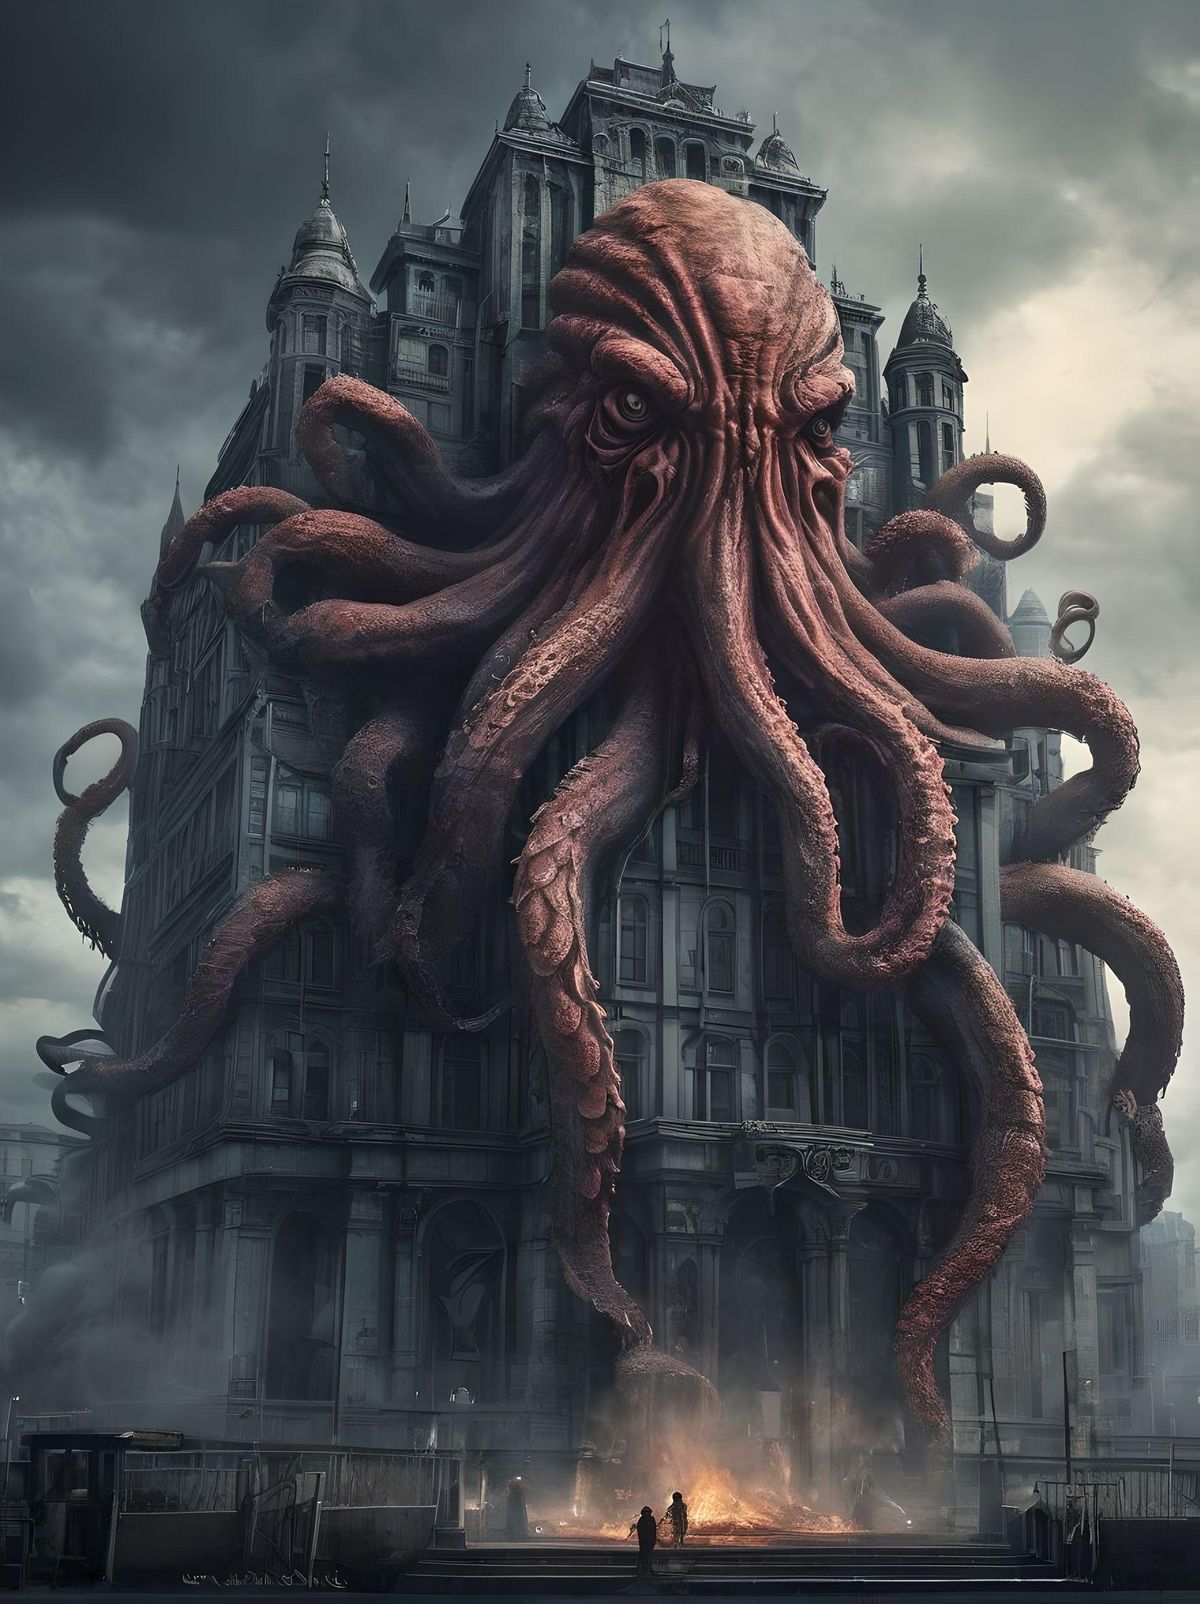 a large building with a giant kraken monster on top of it, surreal concept art, surreal and fantasy art, horror surreal art, epic digital art illustration, amazing fantasy art, fantasy horror art, terrifying architecture, an giant evil, horror fantasy art, surrealism!!!!! concept art, scary art, an ominous fantasy illustration, satanic creature, creepy surrealism